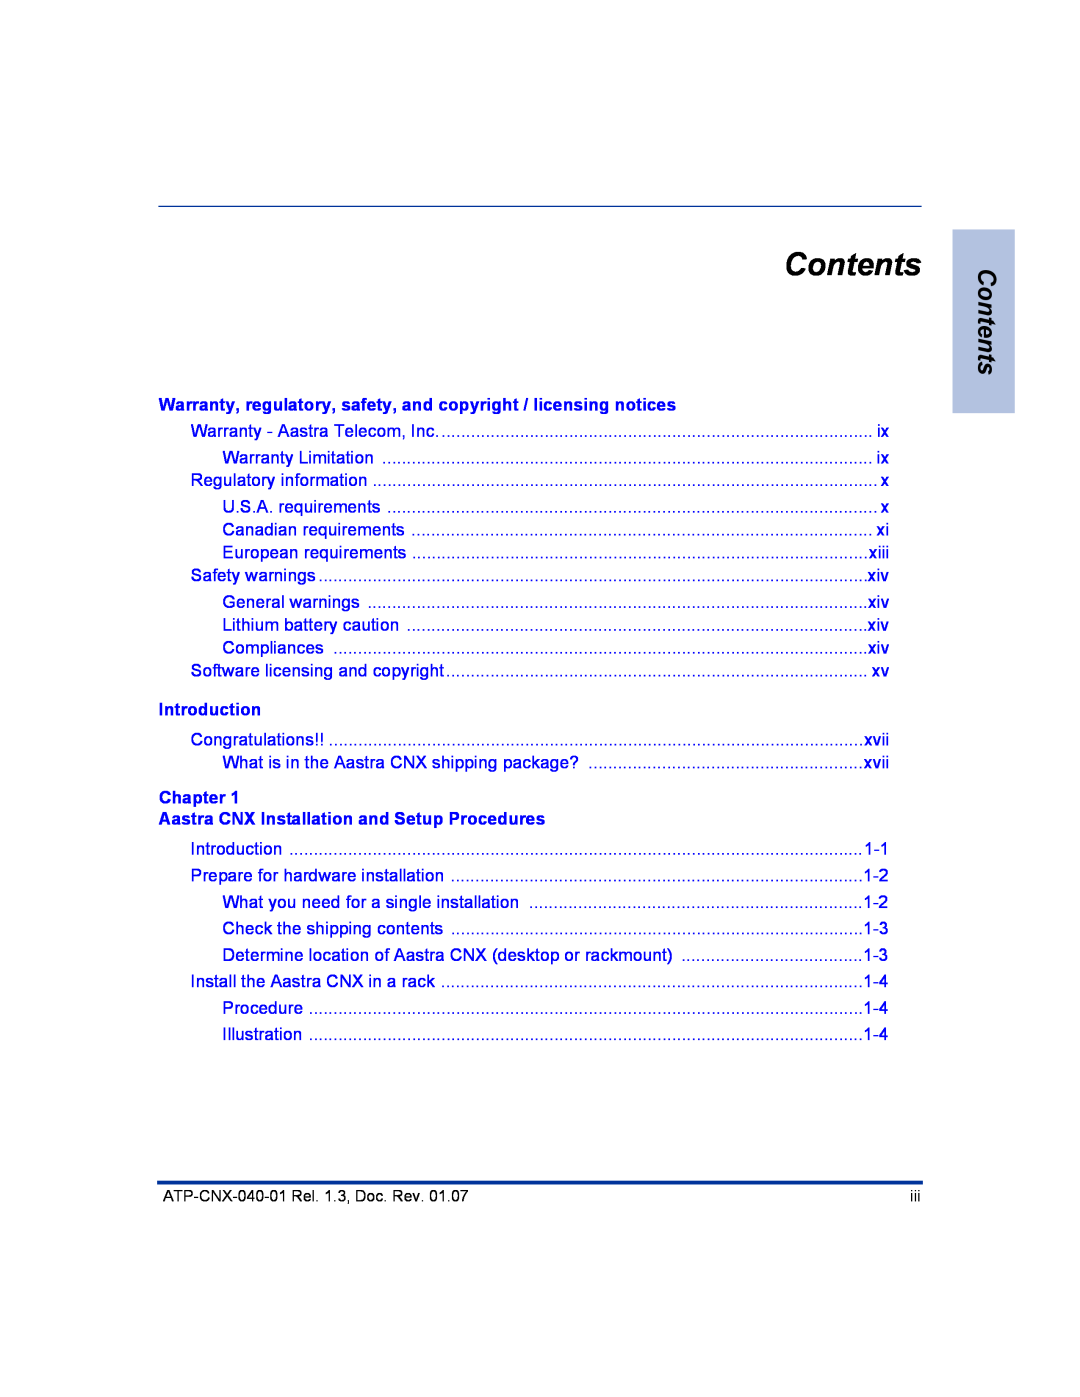 Aastra Telecom ATP-CNX-040-01 Contents, Warranty, regulatory, safety, and copyright / licensing notices, Introduction 